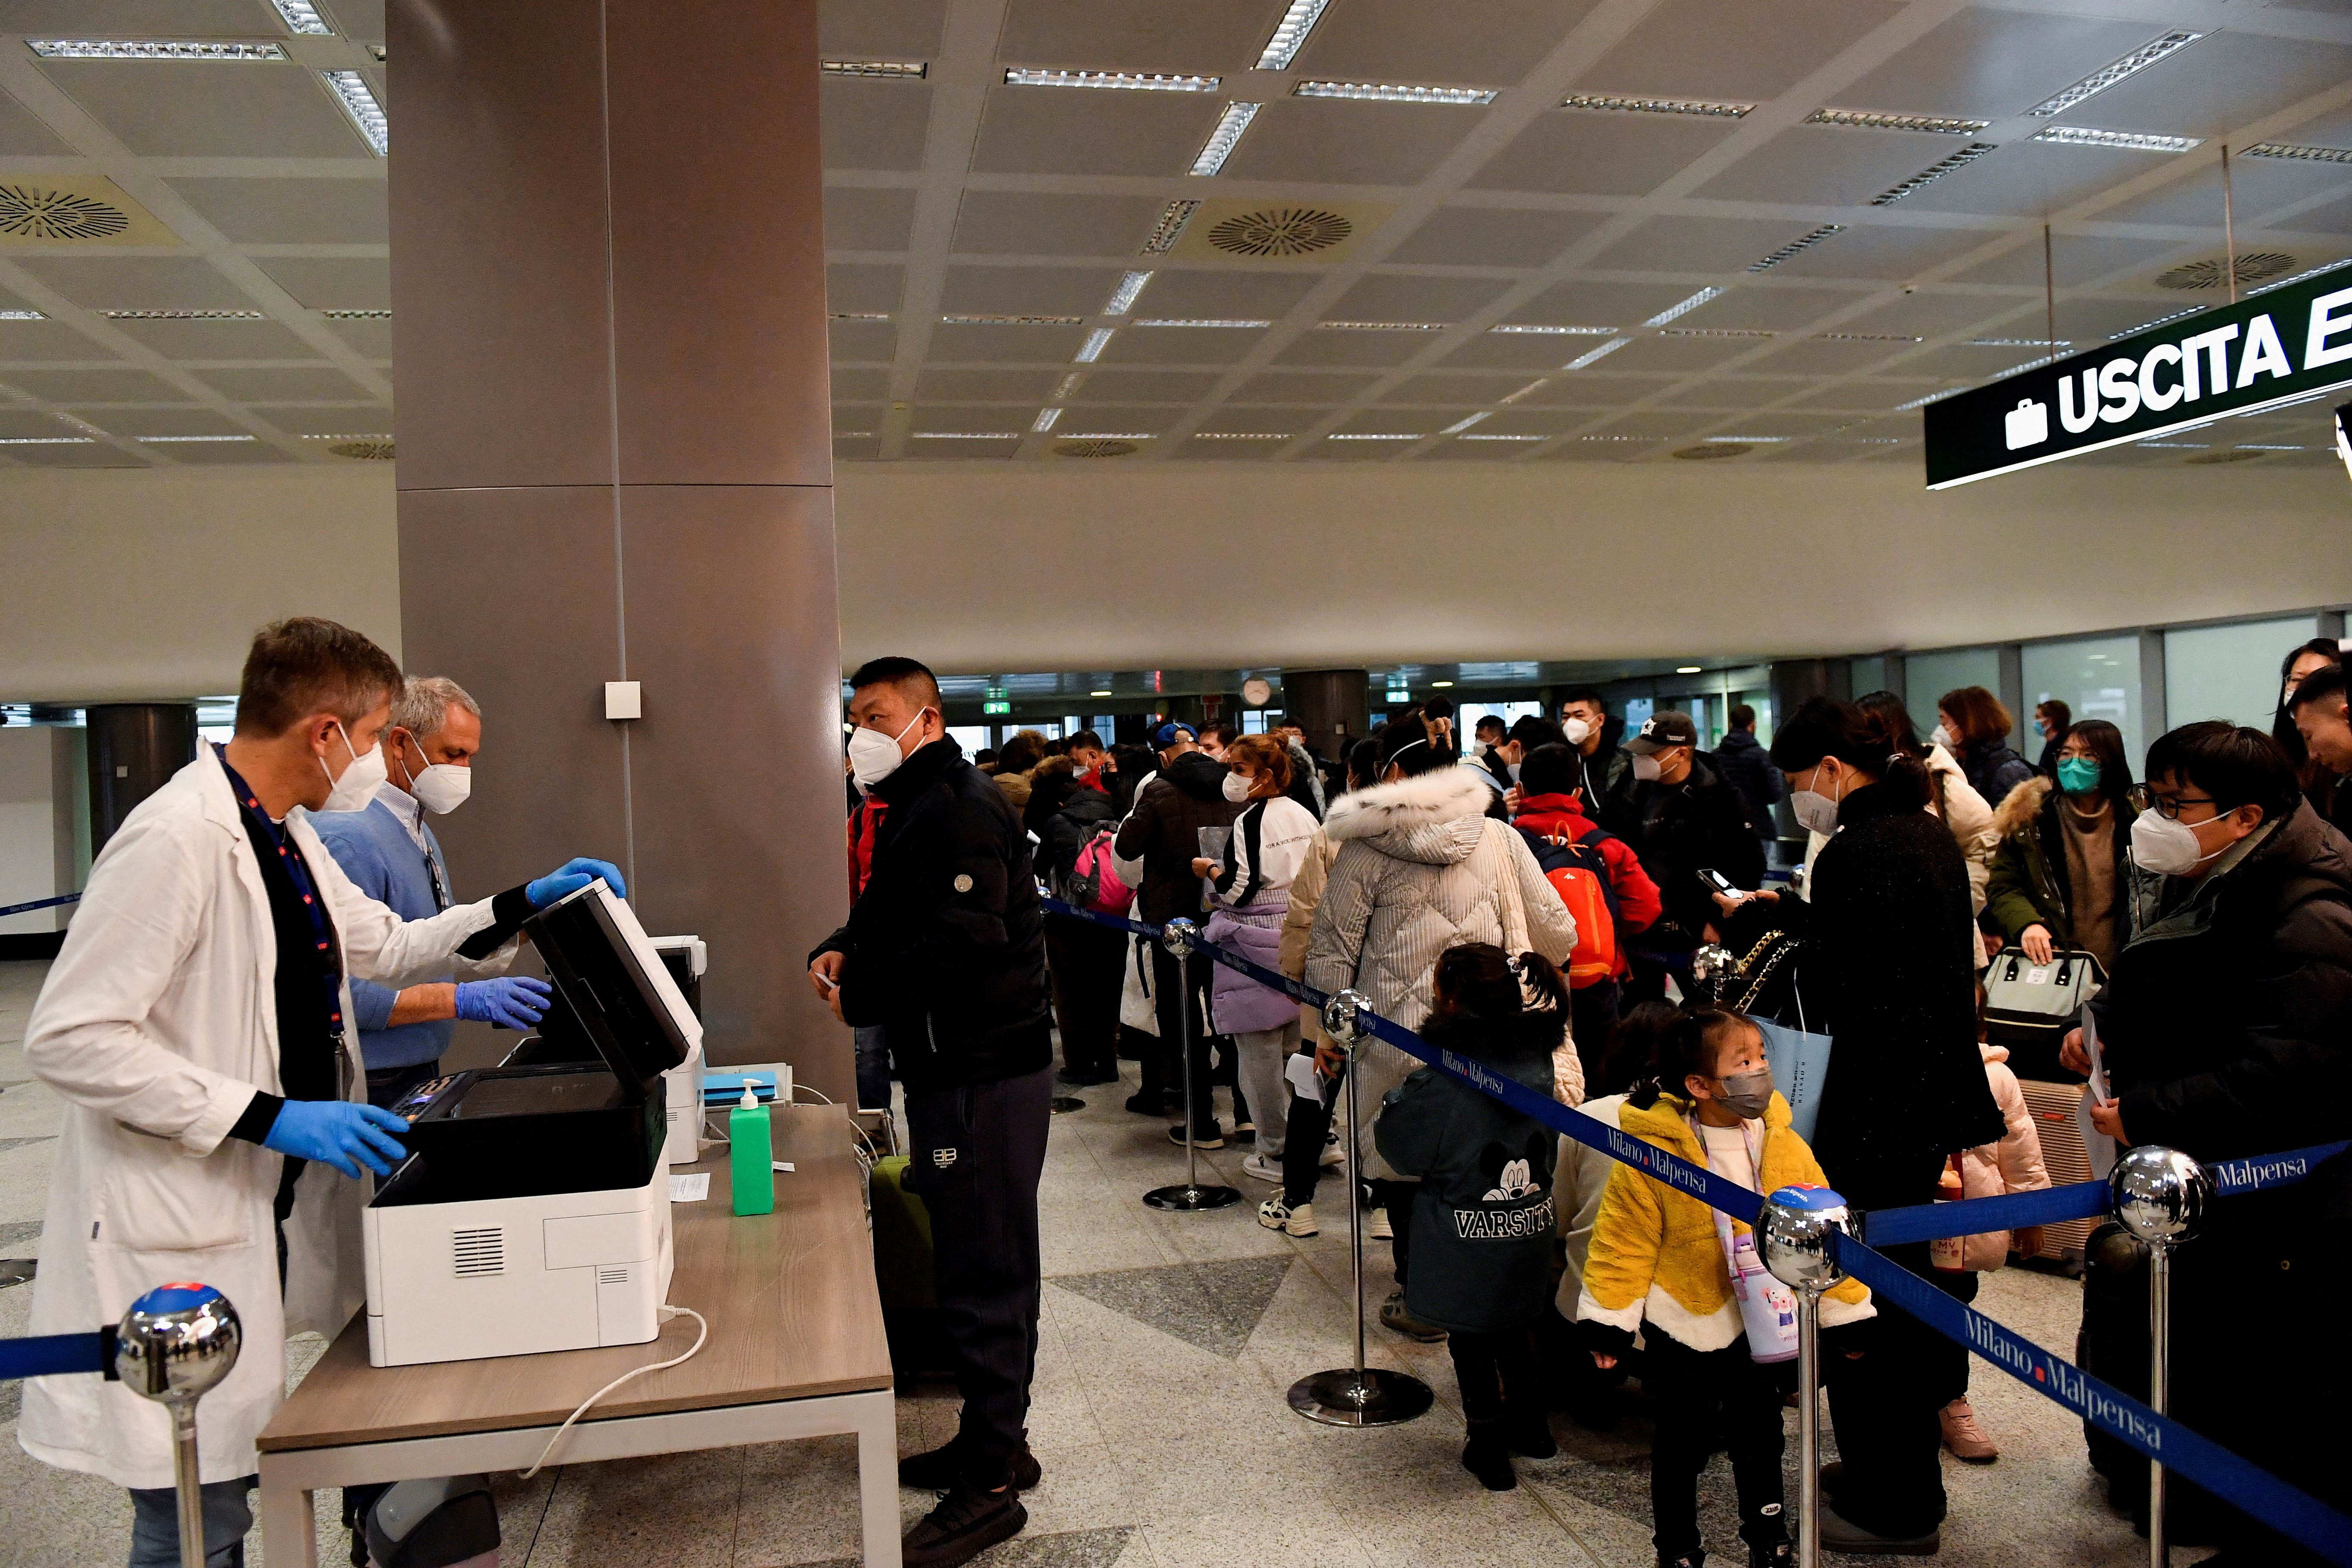 Italy introduces mandatory COVID-19 testing for travelers from China